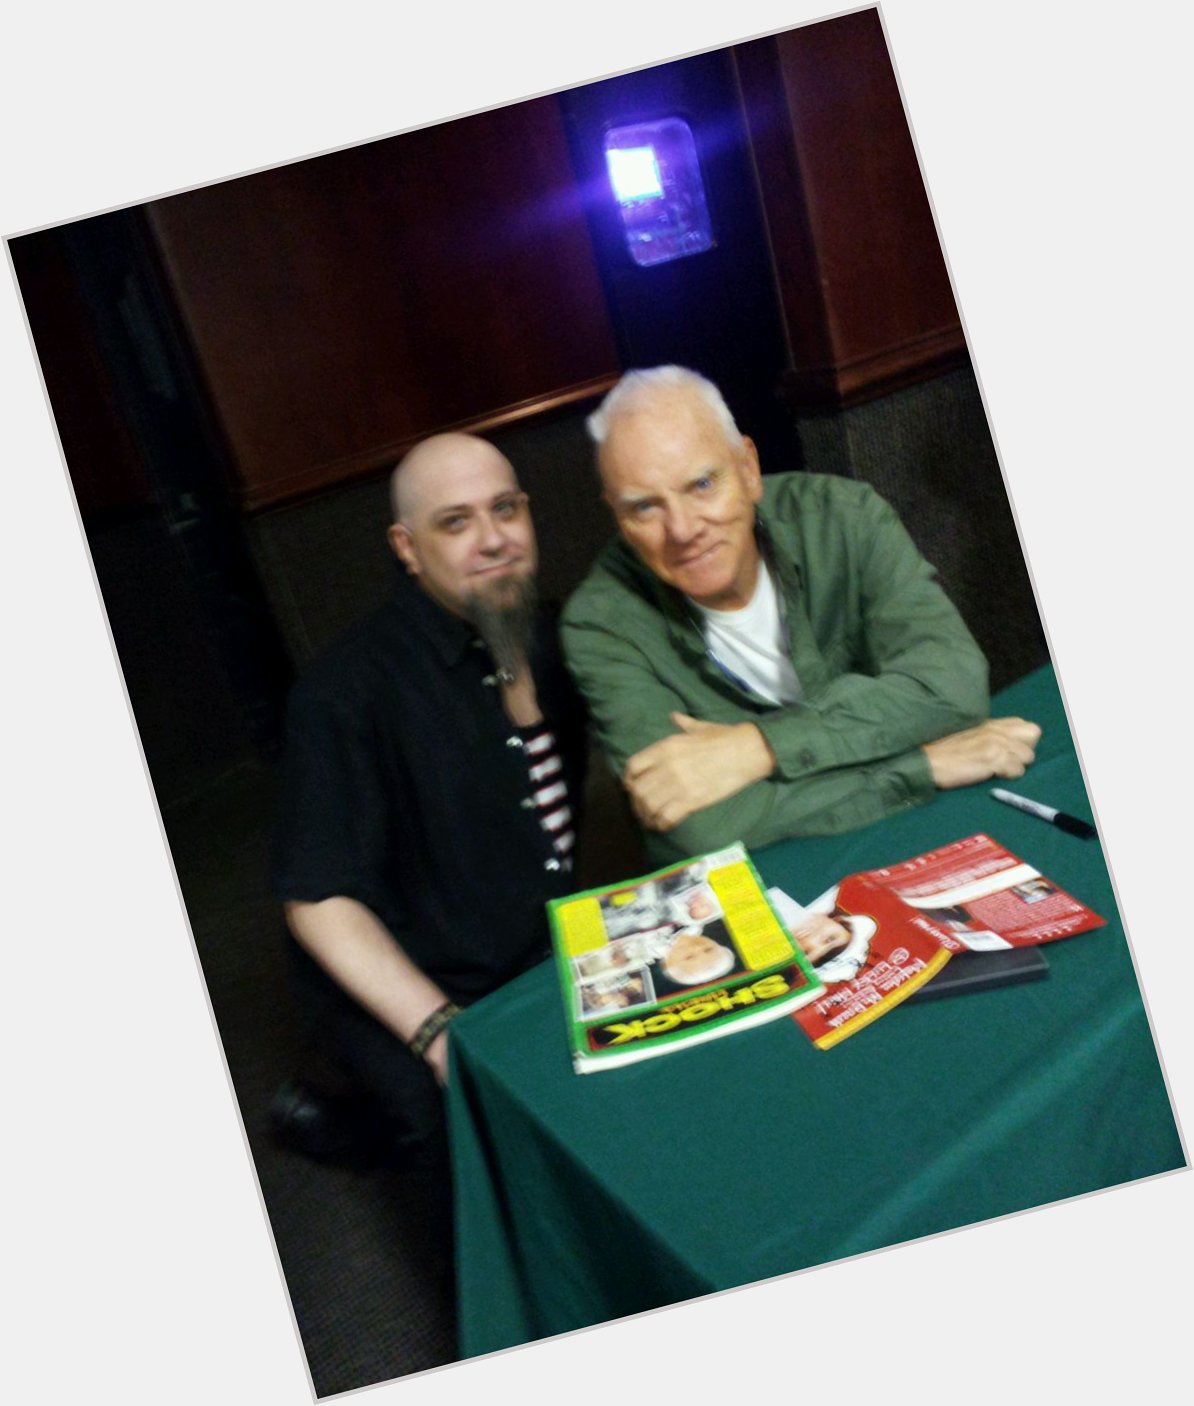 Happy Birthday to my favorite actor, Malcolm McDowell! 